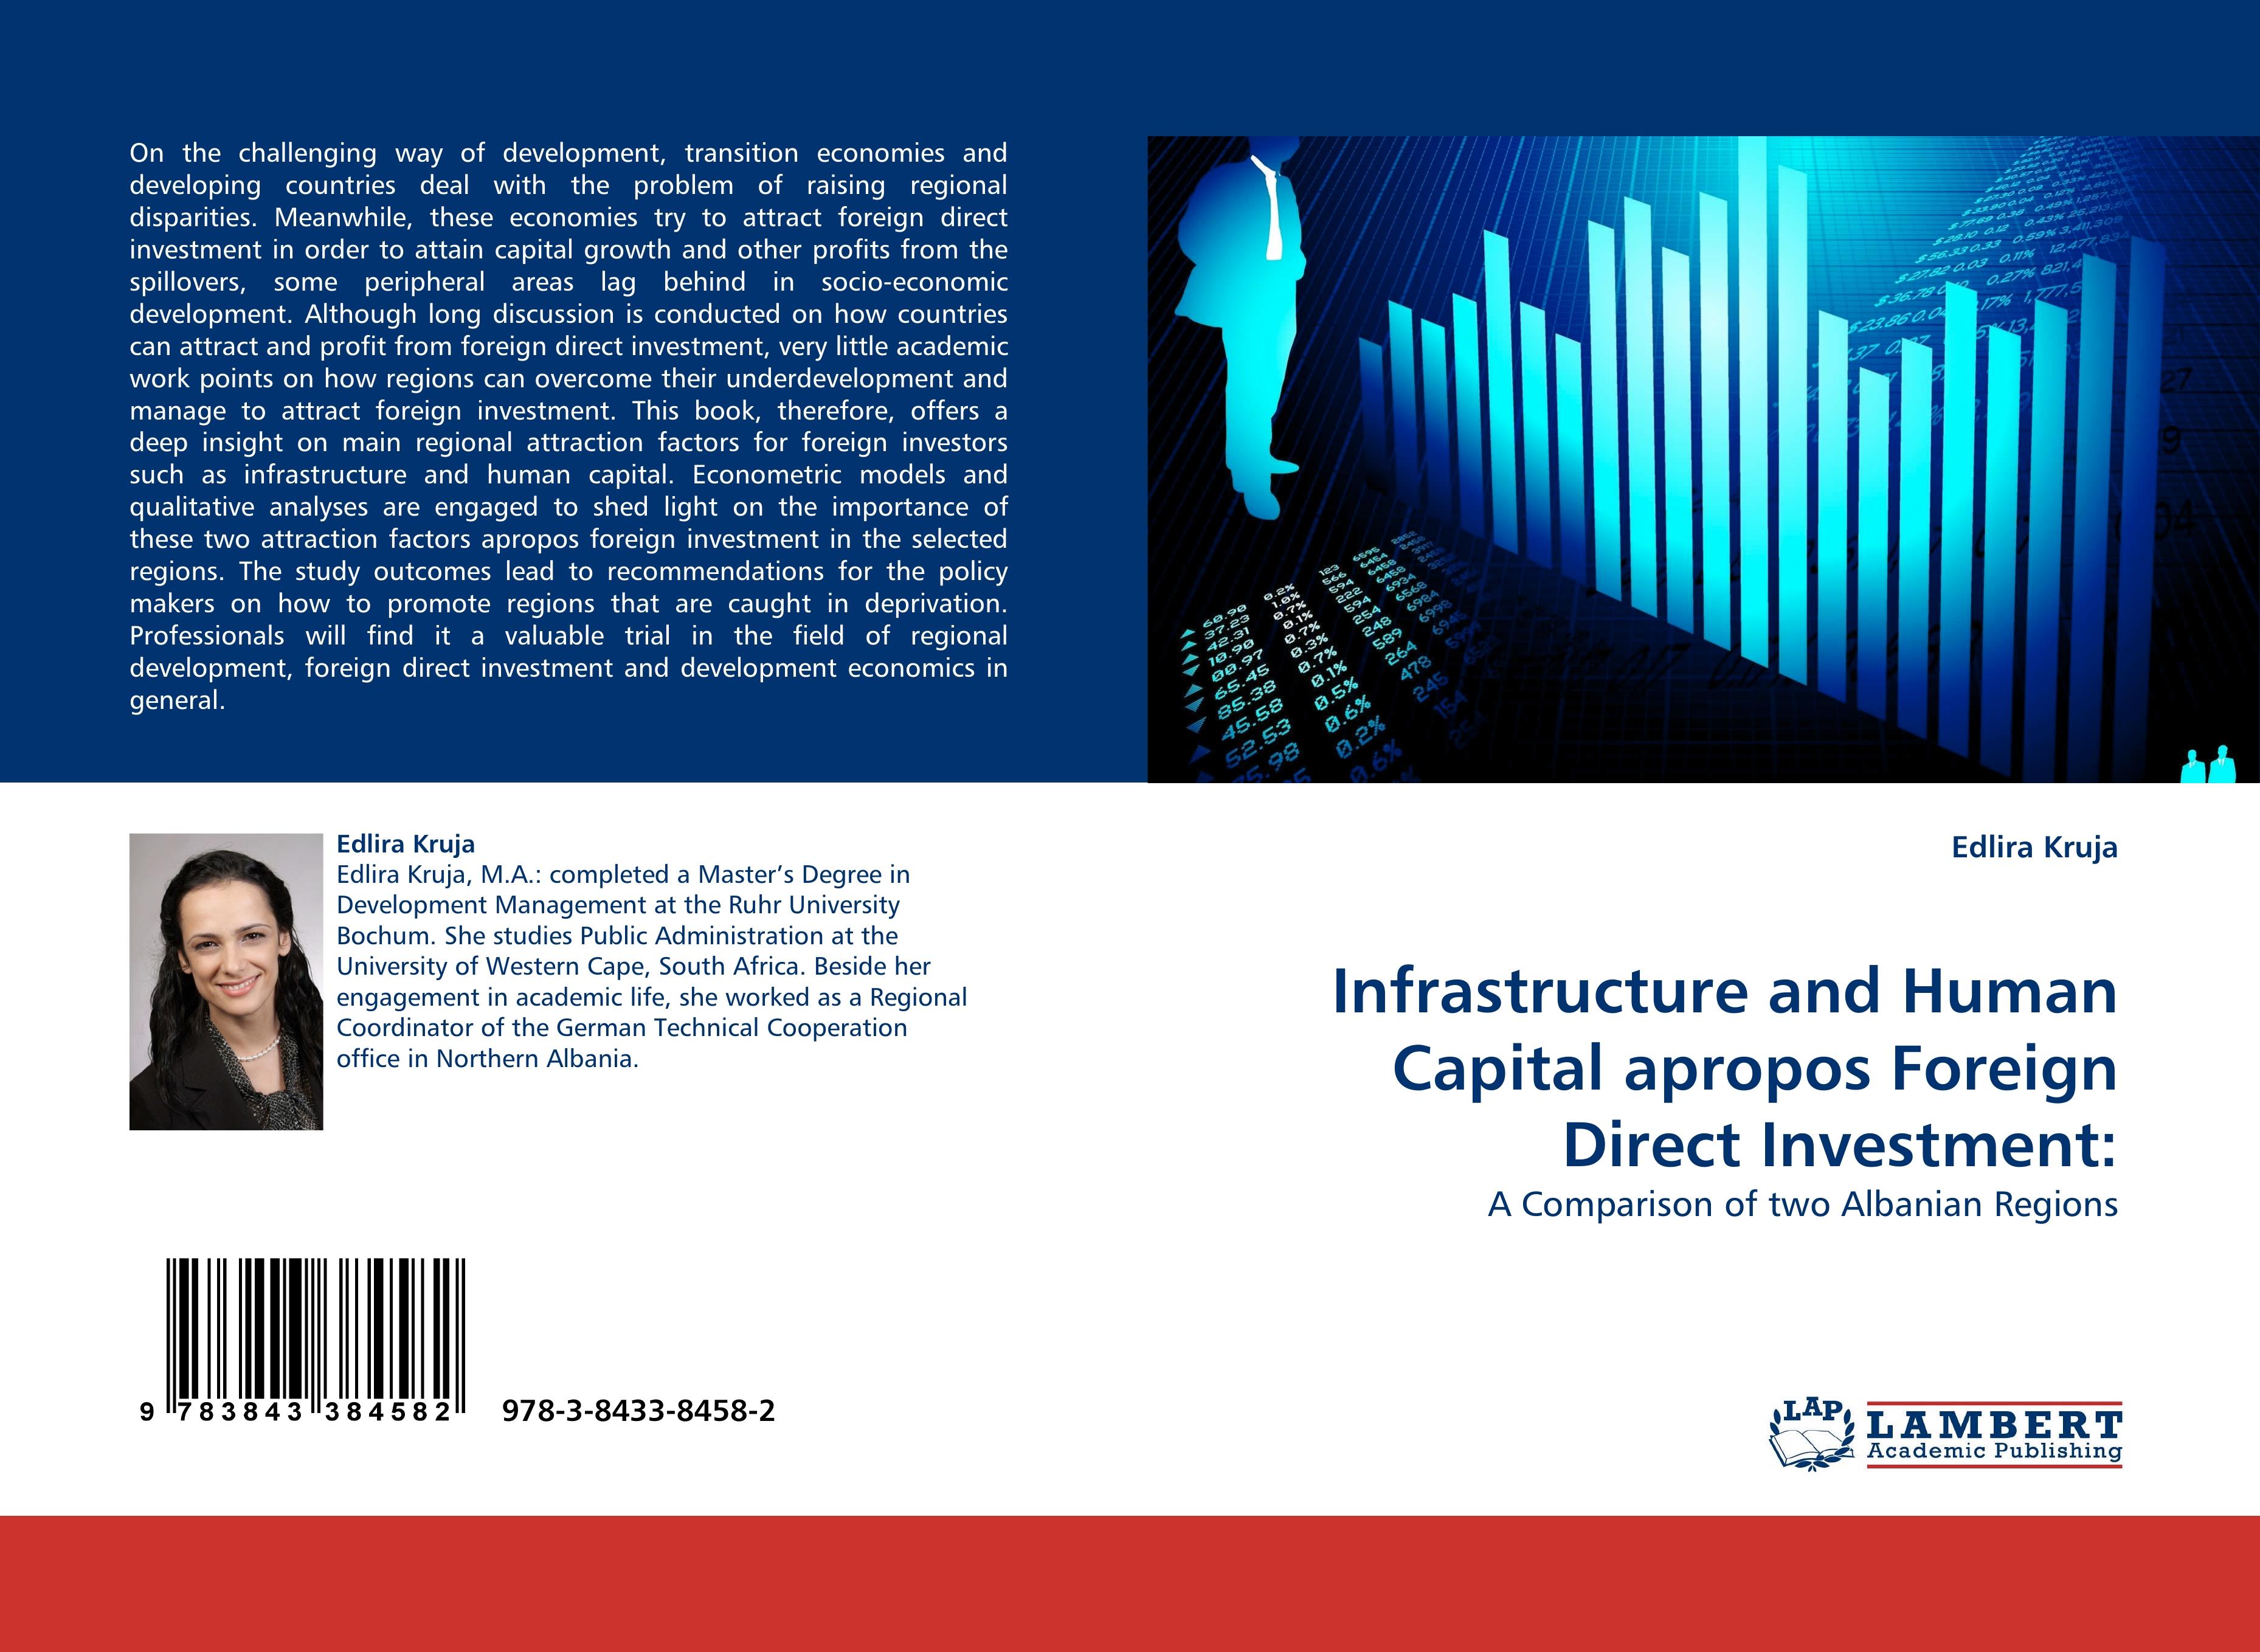 Infrastructure and Human Capital apropos Foreign Direct Investment - Edlira Kruja